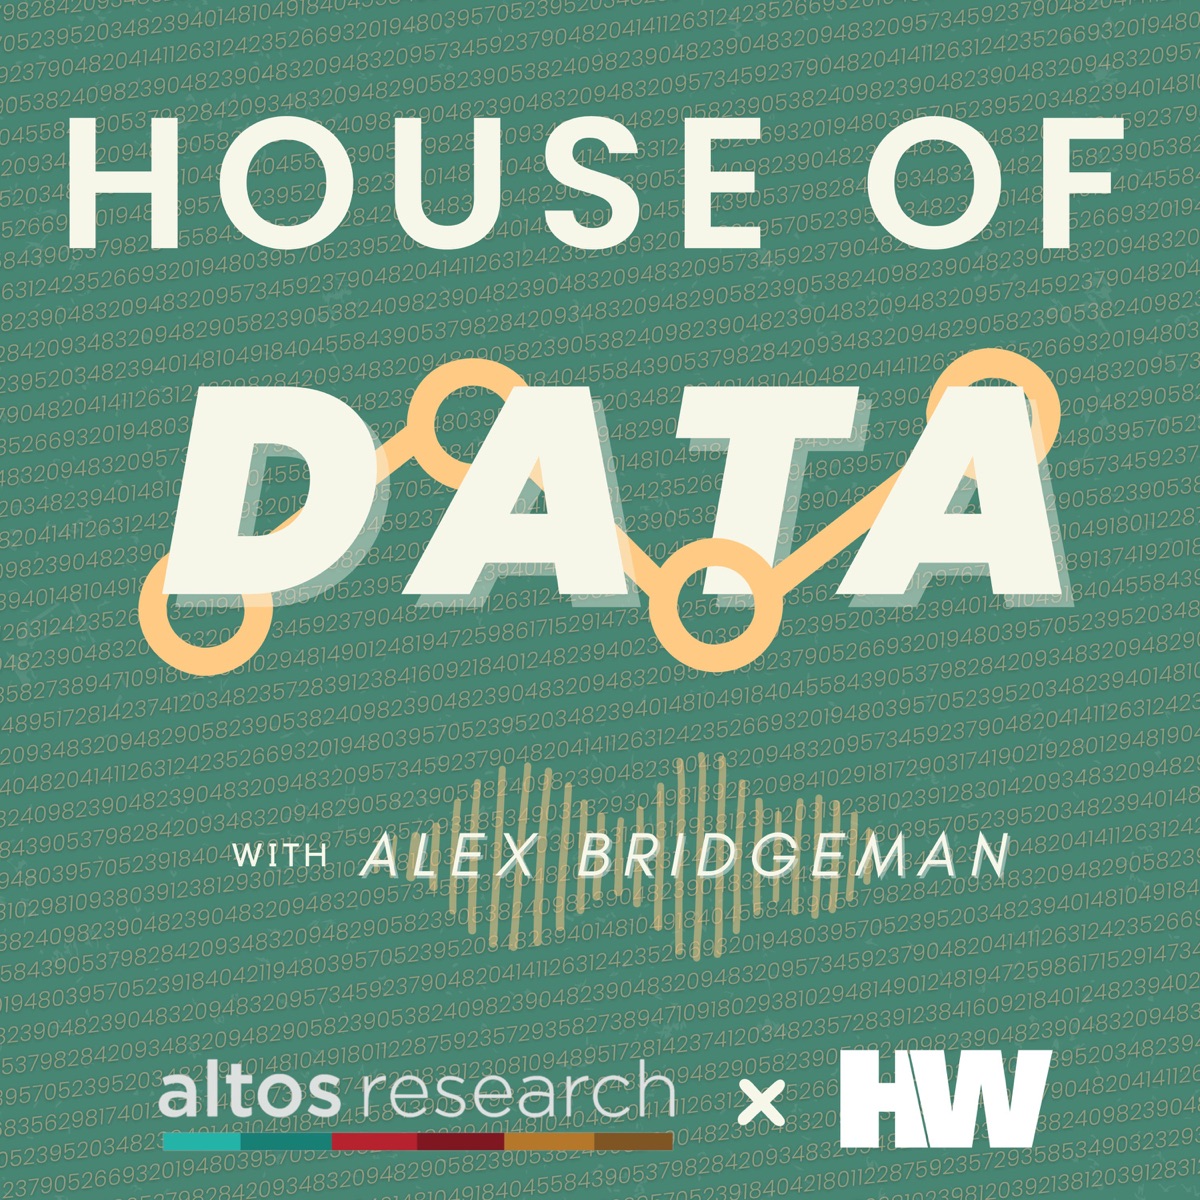 [House of Data Podcast by Altos Research](https://open.spotify.com/episode/6wkUaAN6VCqOOY5k6aBisv?si=8pIjIEdqQ-W4A9m5PZryfA/)